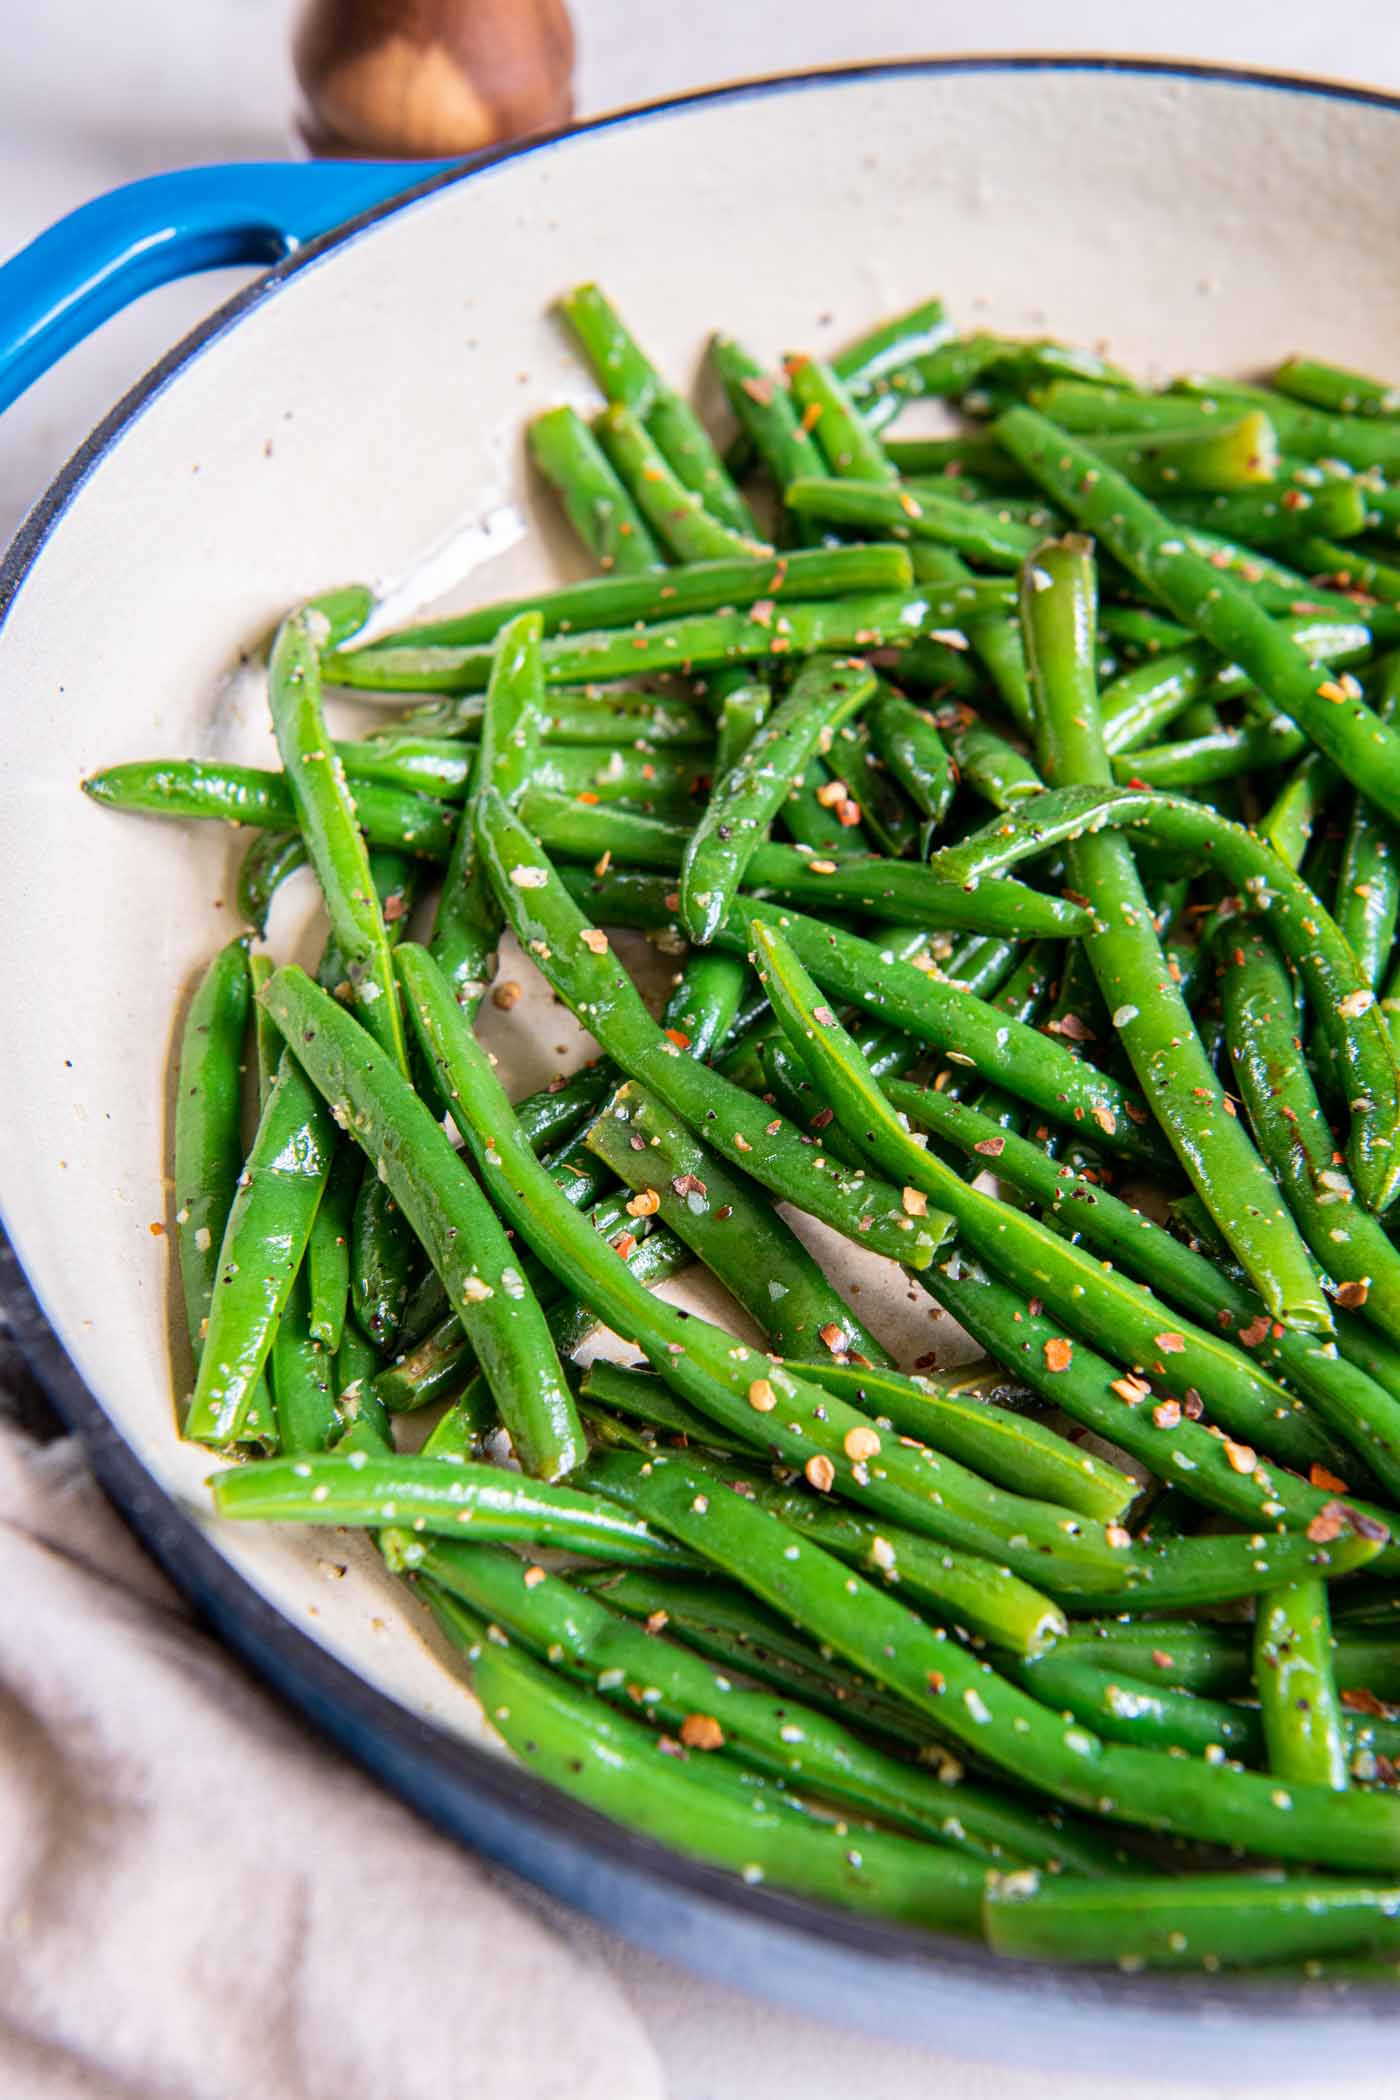 Green beans in a skillet.